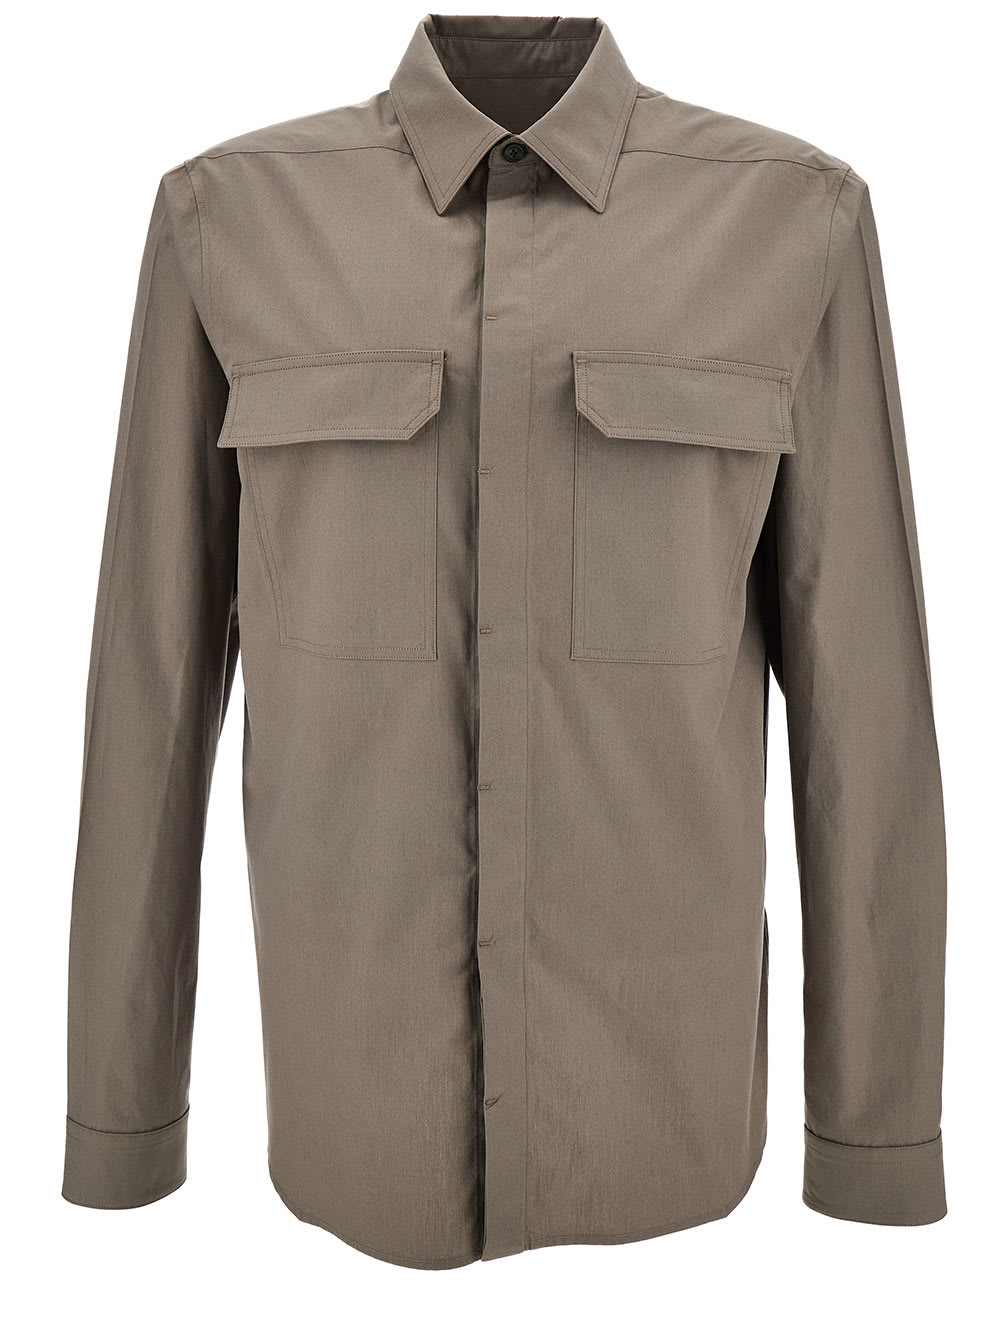 RICK OWENS WORKSHIRT GREY SHIRT WITH CONCEALED CLOSURE IN COTTON MAN